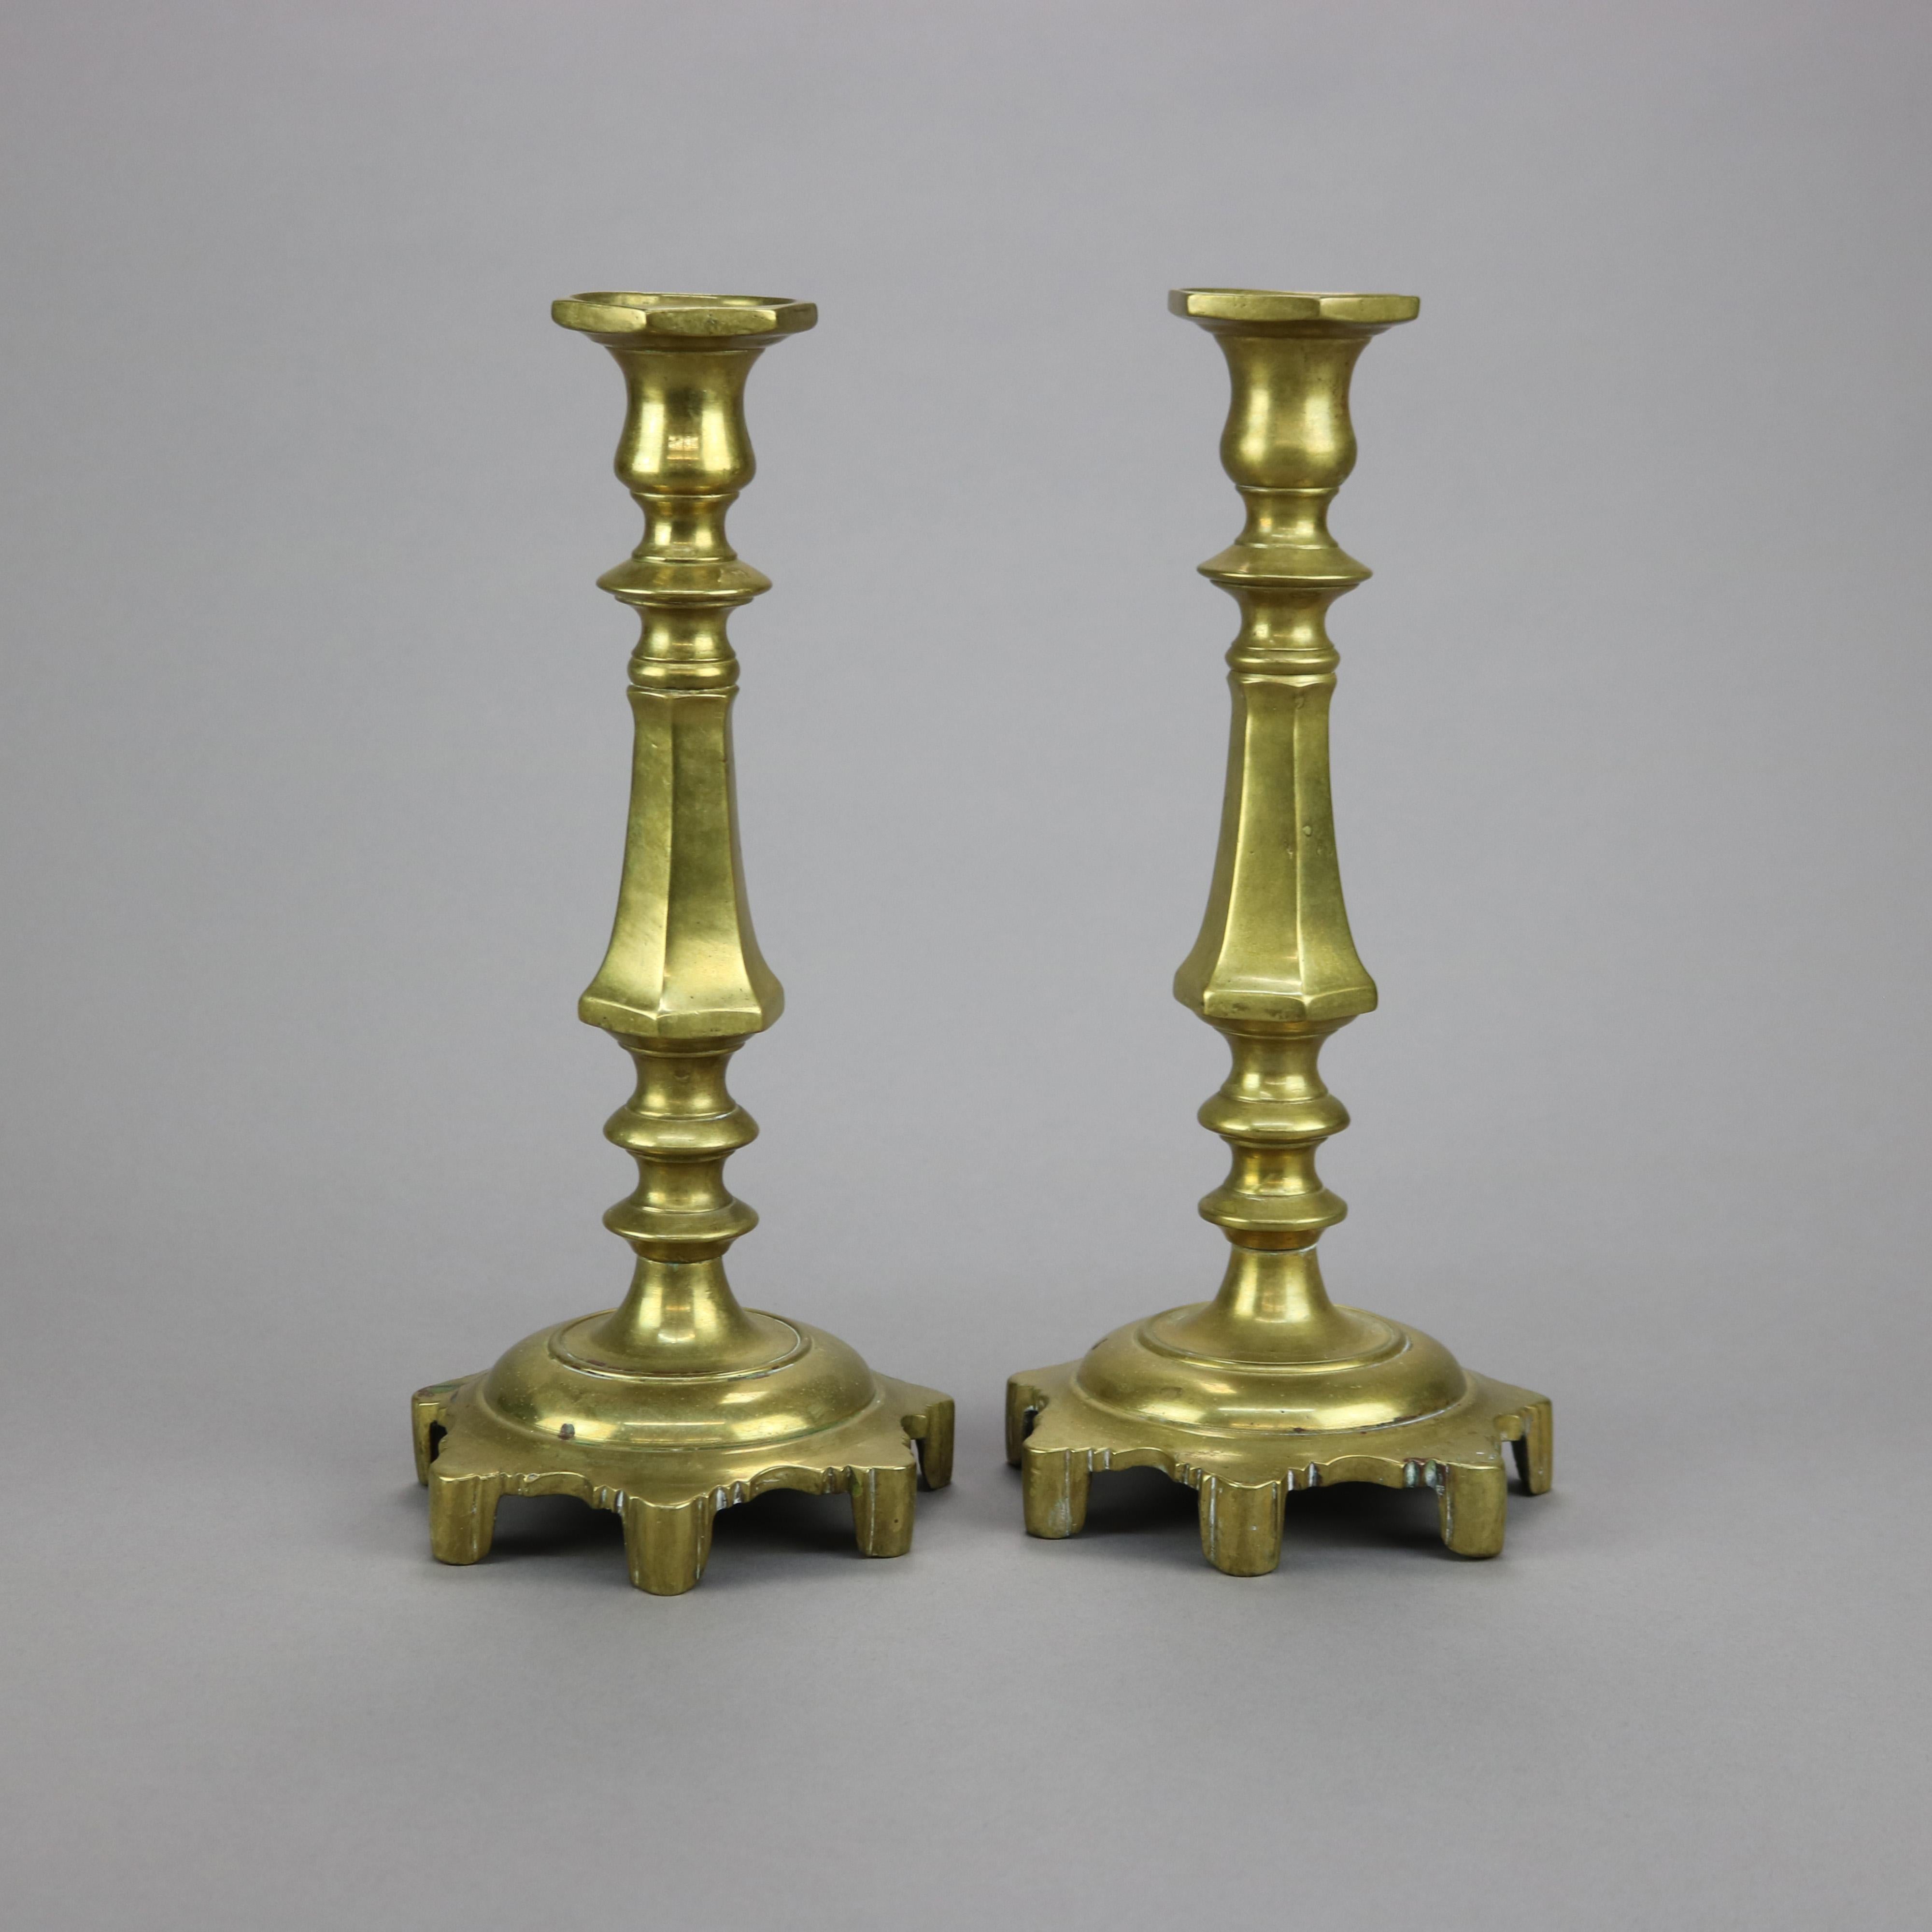 American Colonial Antique Pair of Early American Brass Balustrade Footed Candlesticks 19th C For Sale